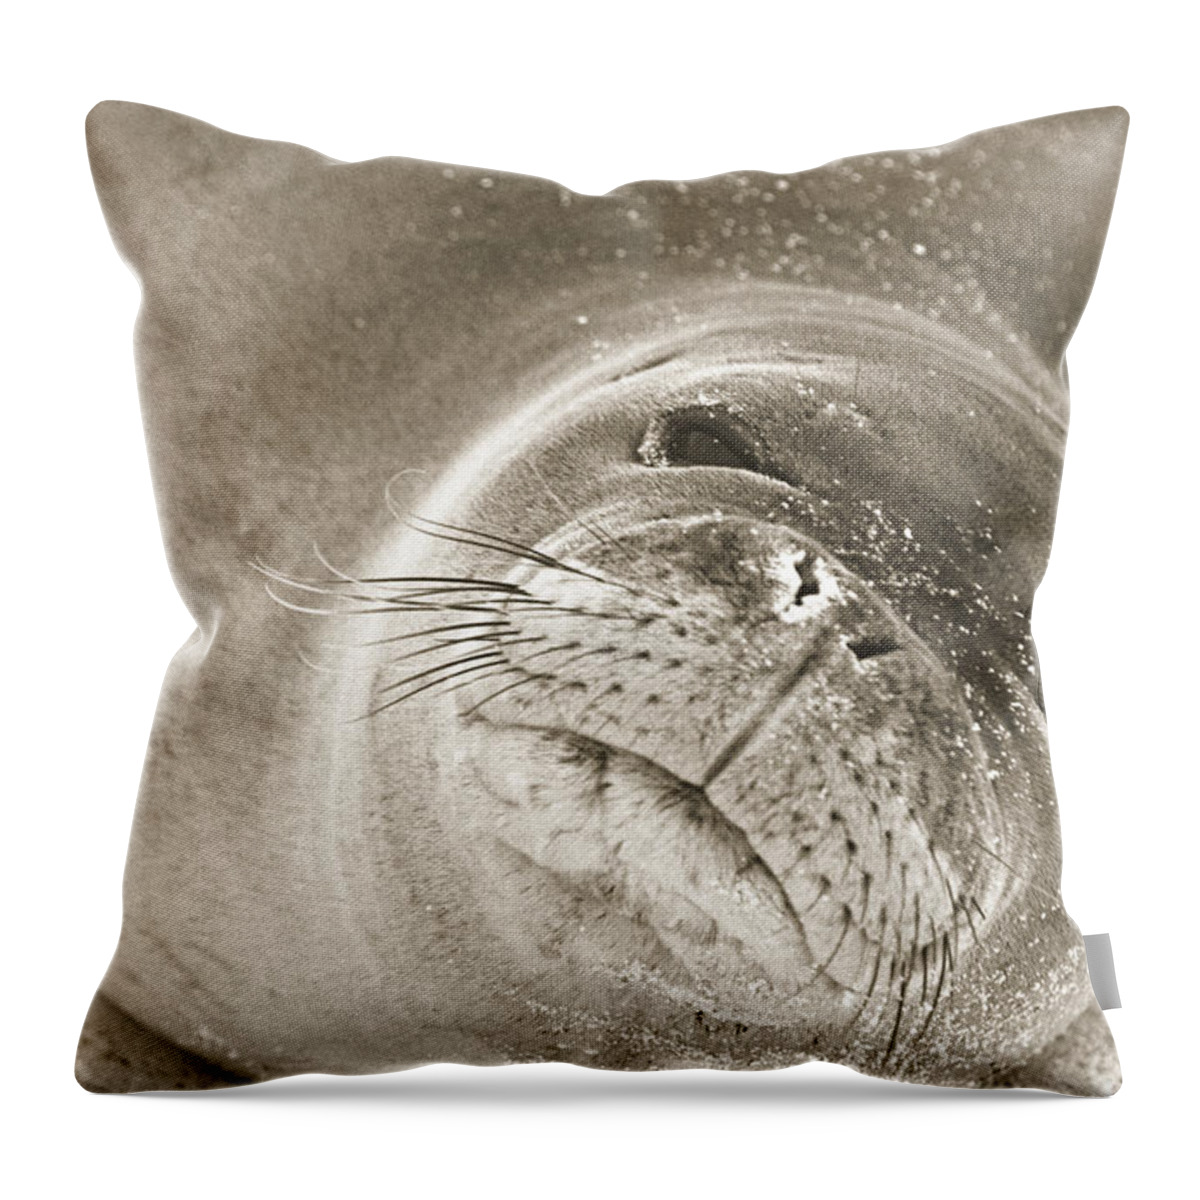 Hawaiian Monk Seal Throw Pillow featuring the photograph Monk Seal by Steven Sparks